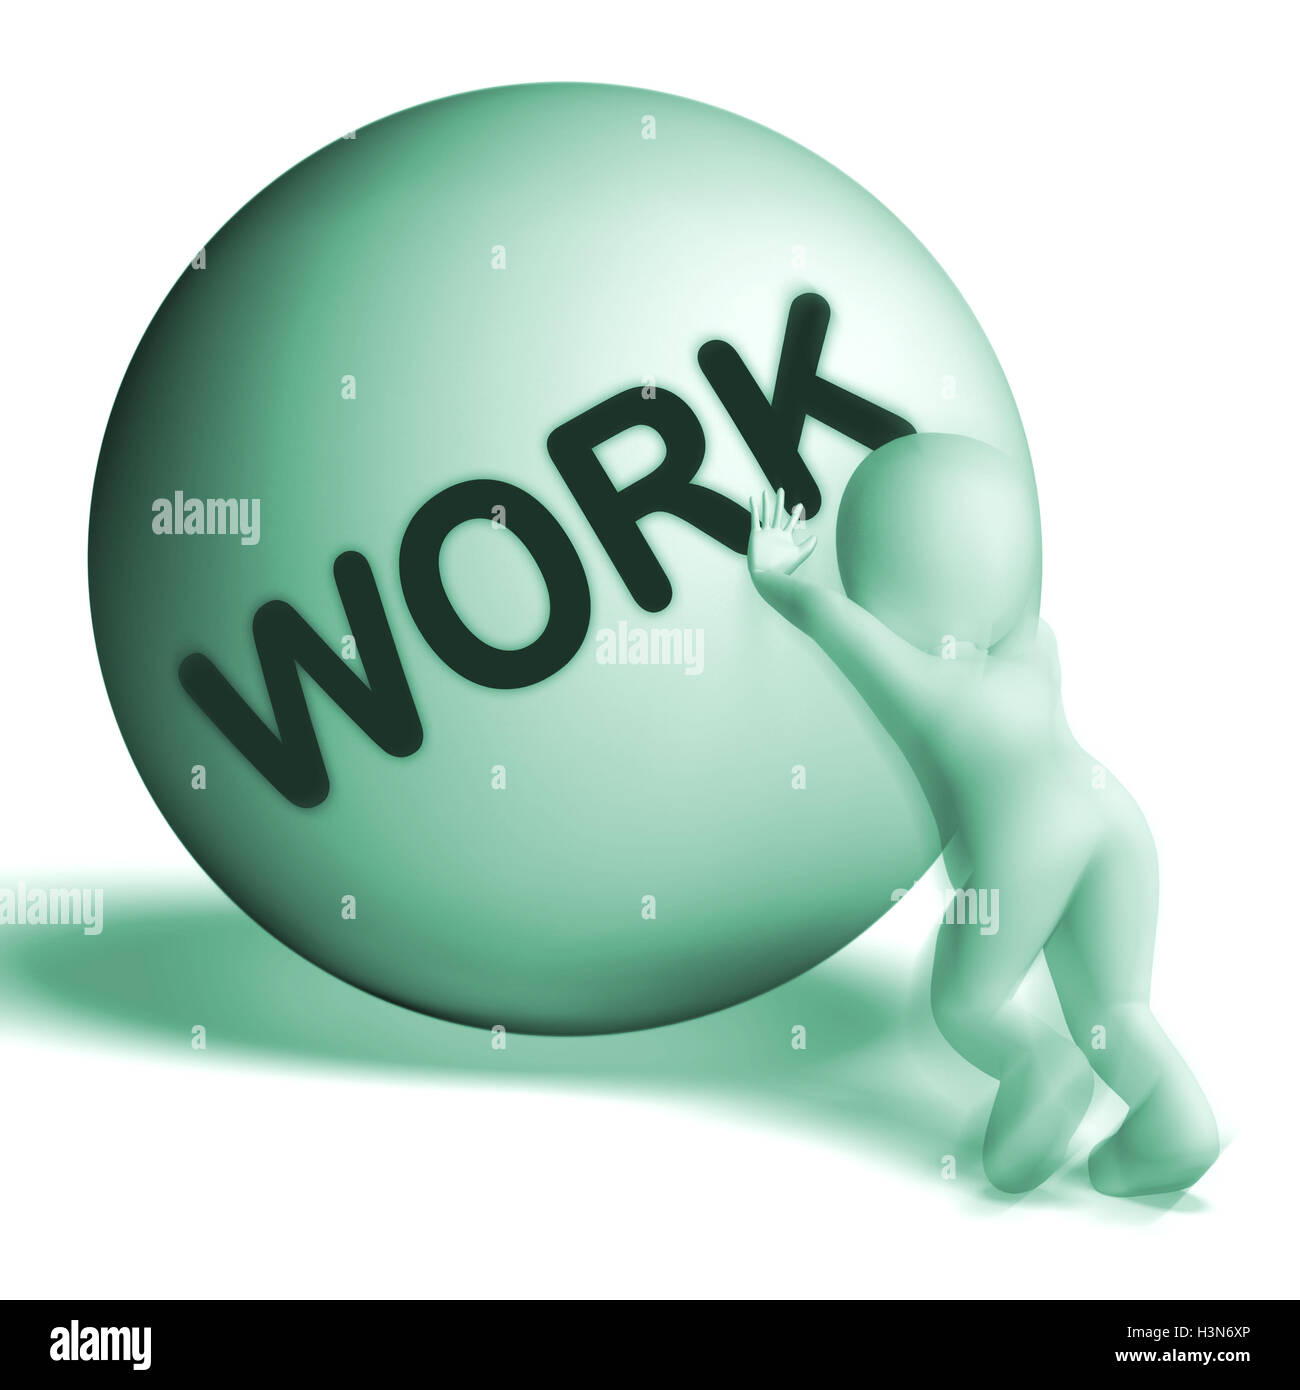 Work Uphill Sphere Shows Difficult Working Labour Stock Photo